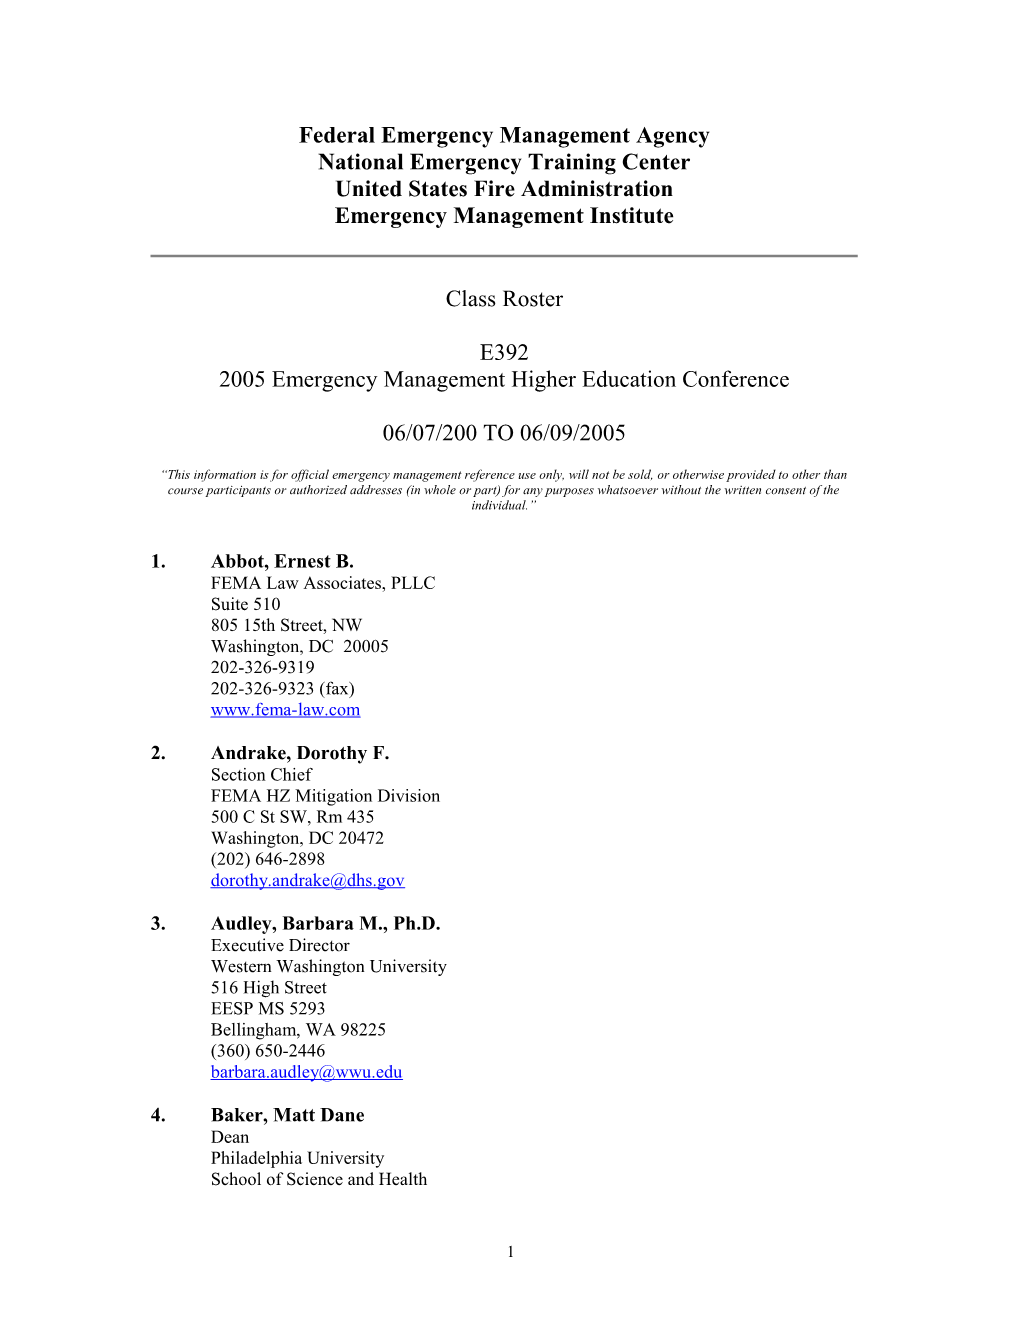 Federal Emergency Management Agency s2